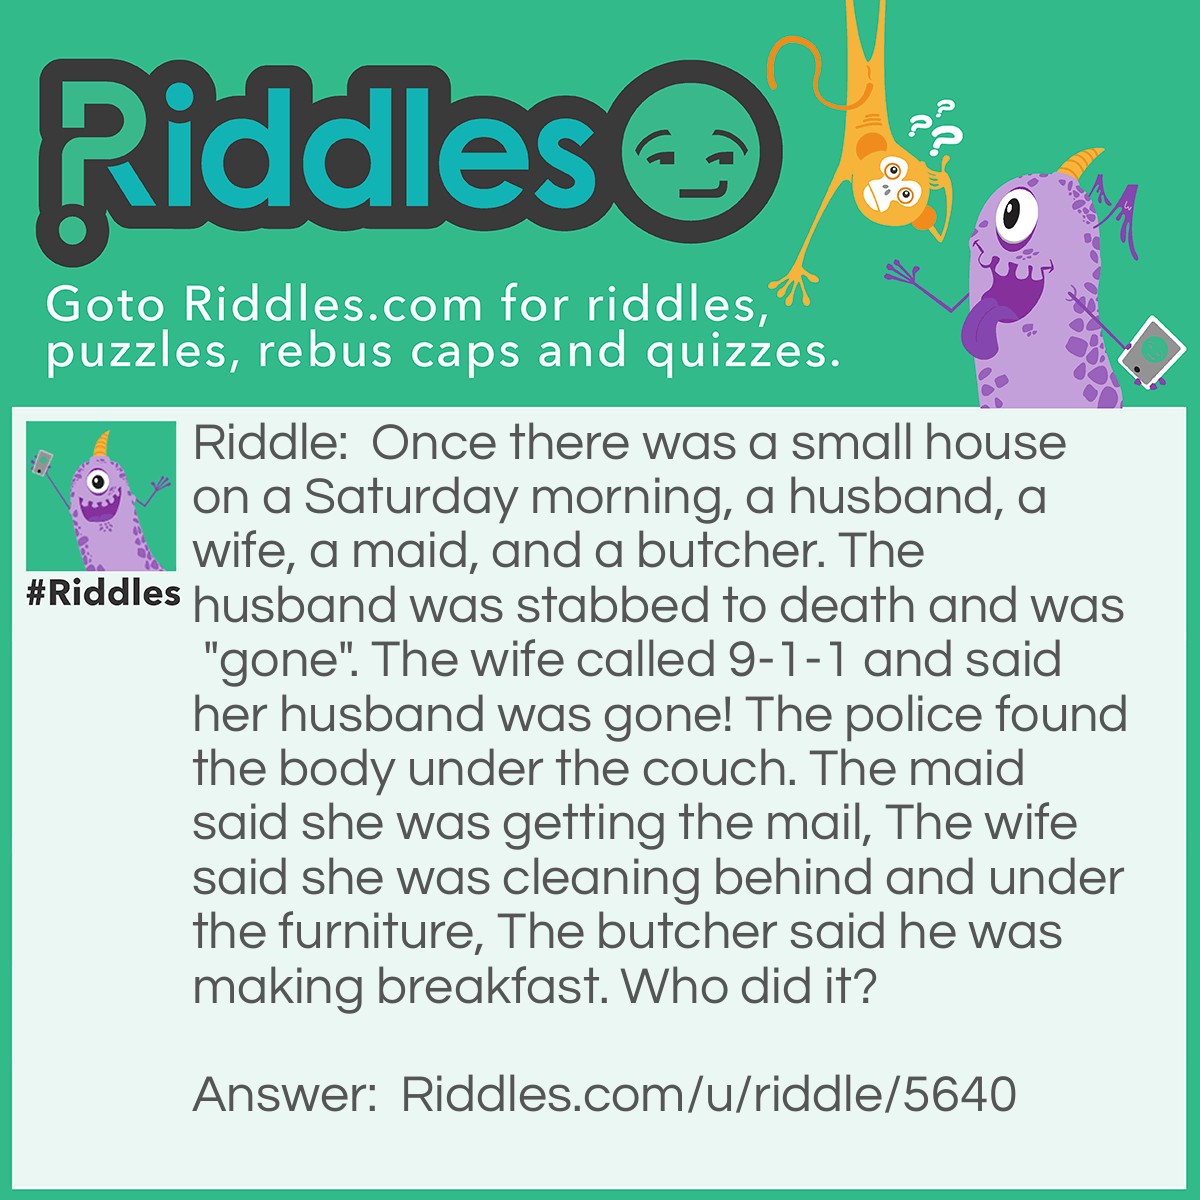 Riddle: Once there was a small house on a Saturday morning, a husband, a wife, a maid, and a butcher. The husband was stabbed to death and was "gone". The wife called 9-1-1 and said her husband was gone! The police found the body under the couch. The maid said she was getting the mail, The wife said she was cleaning behind and under the furniture, The butcher said he was making breakfast. Who did it? Answer: The wife did it! she was "cleaning" behind and "under" the furniture. he was found under the couch and she was cleaning under the furniture.